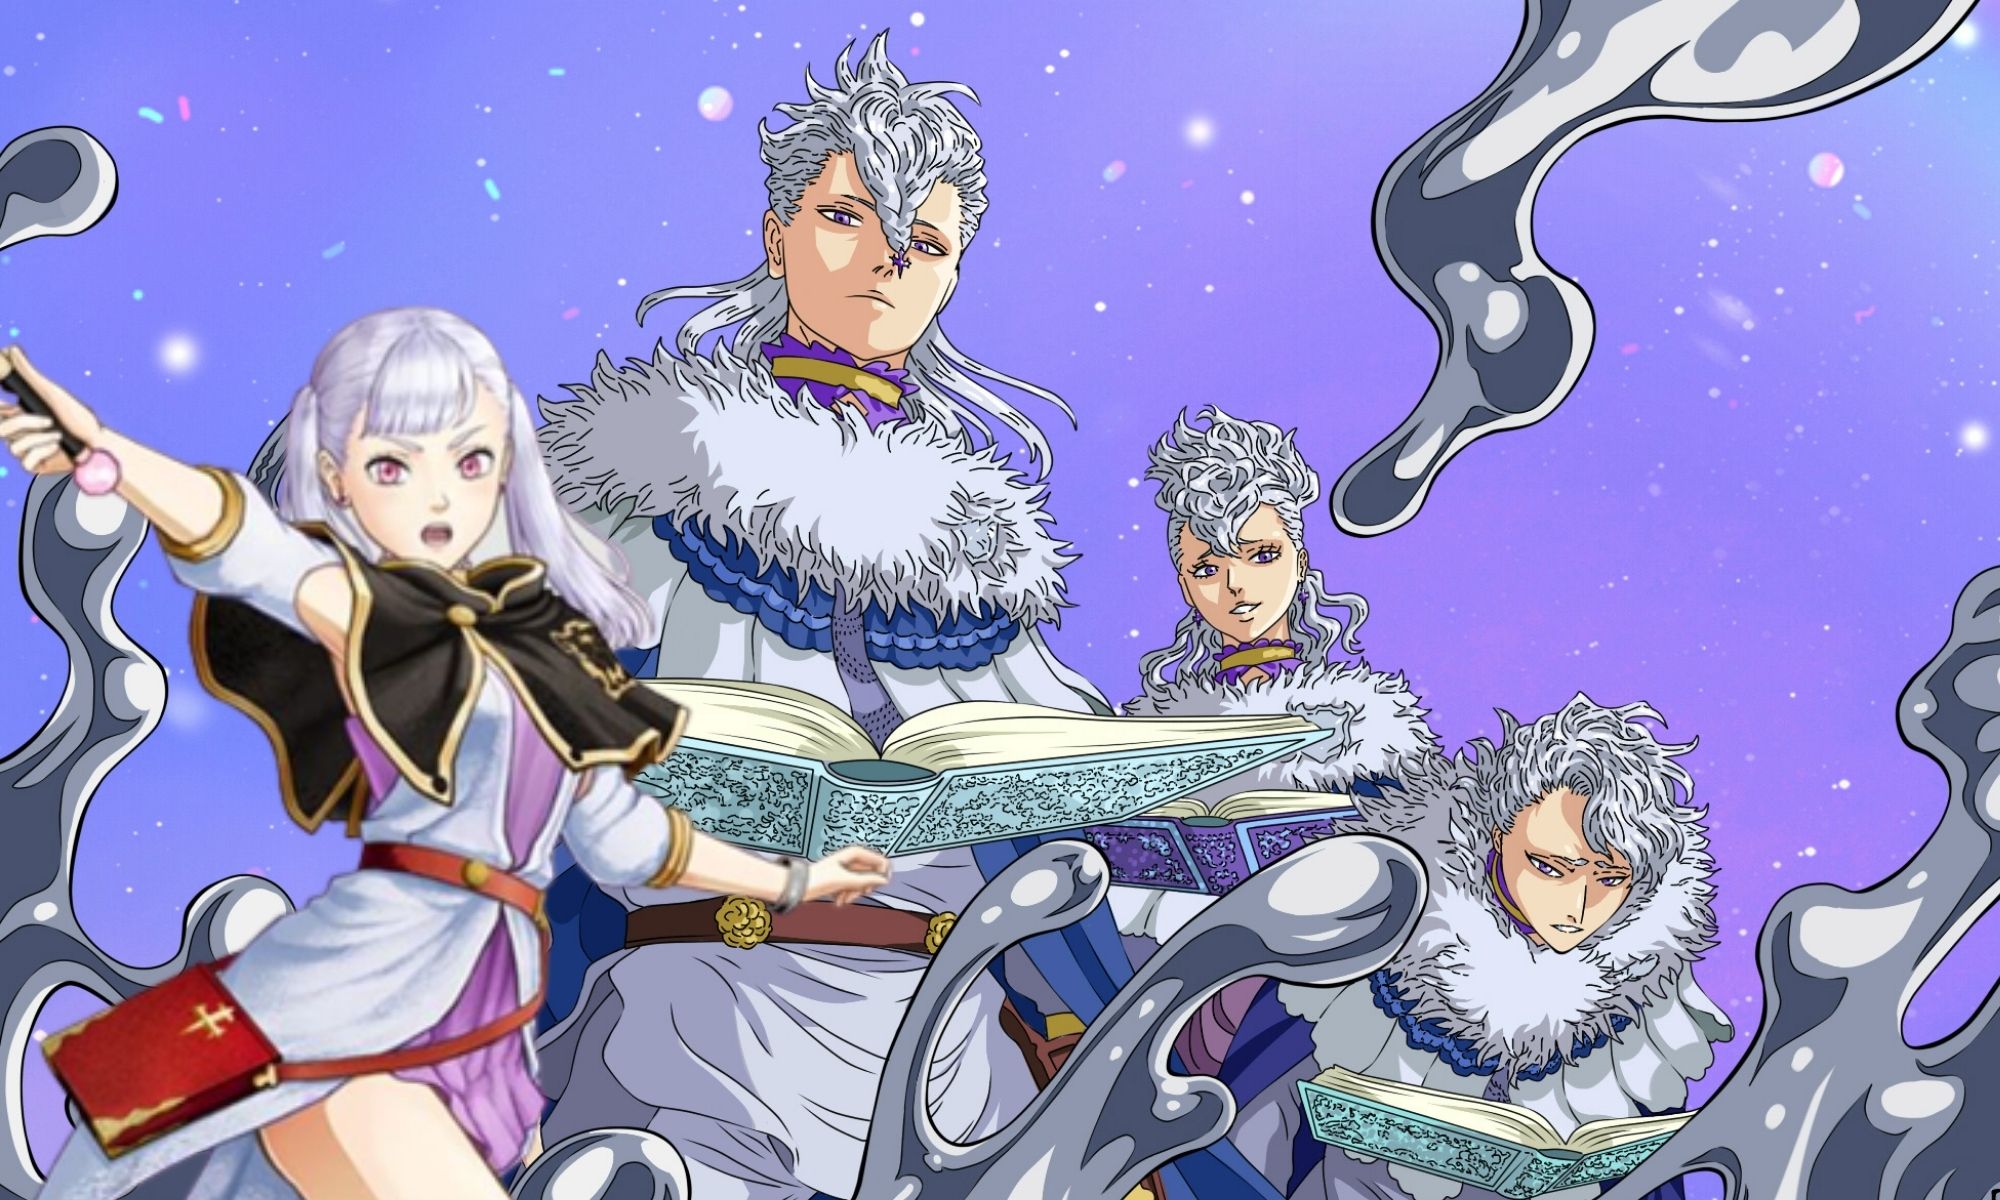 Most Overpowered Families - Silva Family From Black Clover